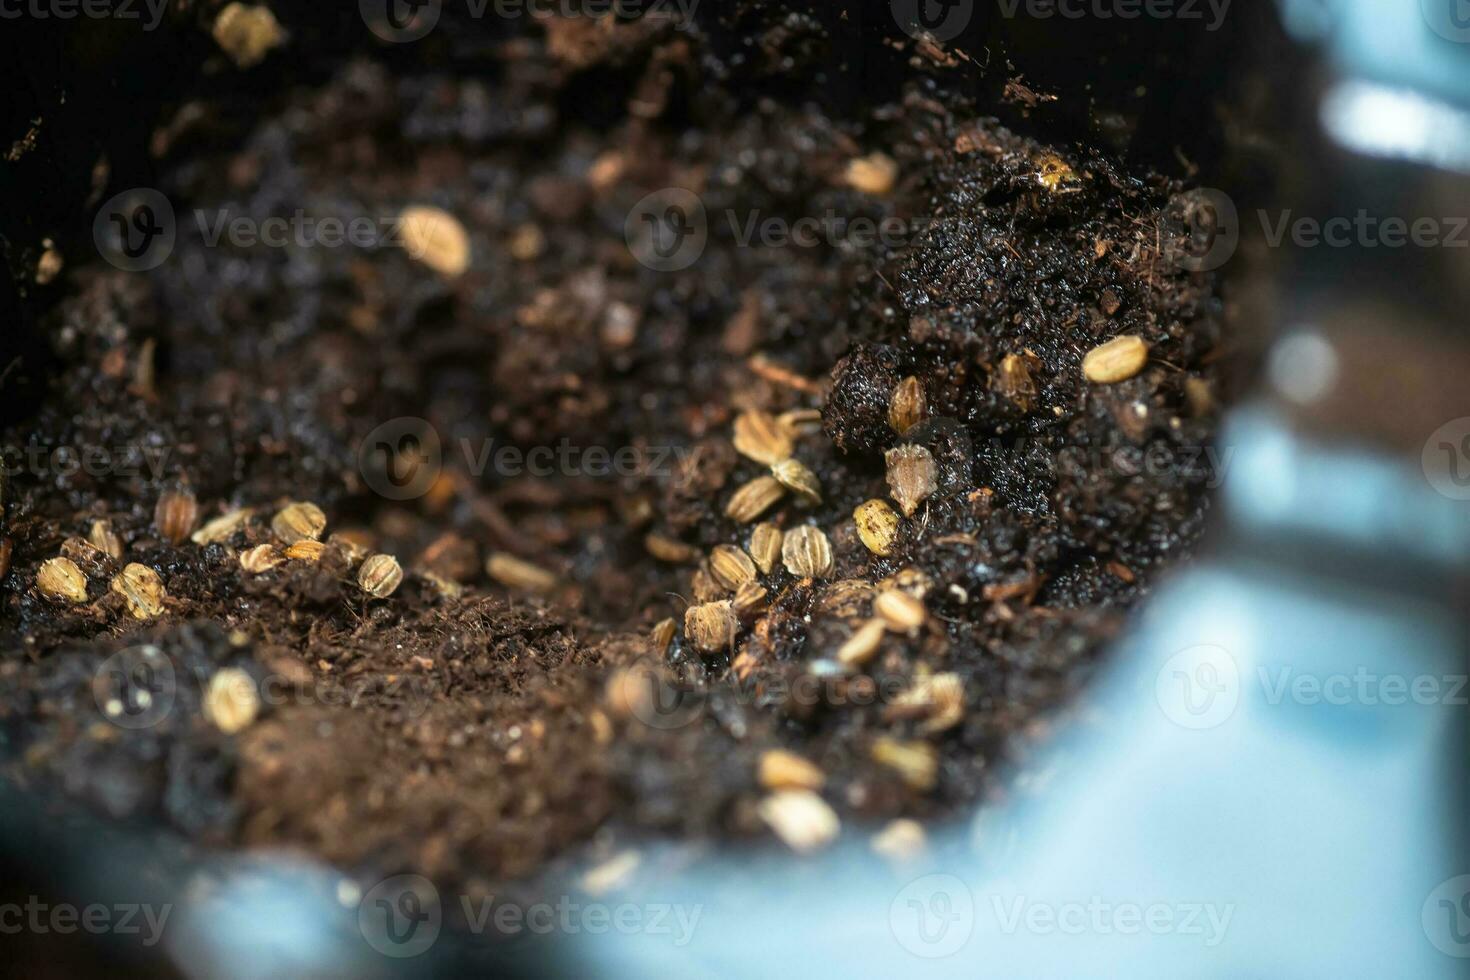 Eruca vesicaria, Rocket, arugula, garden rocket, ruchtetta, rucola, rucoli, rugula, colewort, and roquette seeds on soil close up. Sowing seeds of arugula for growing microgreen. photo